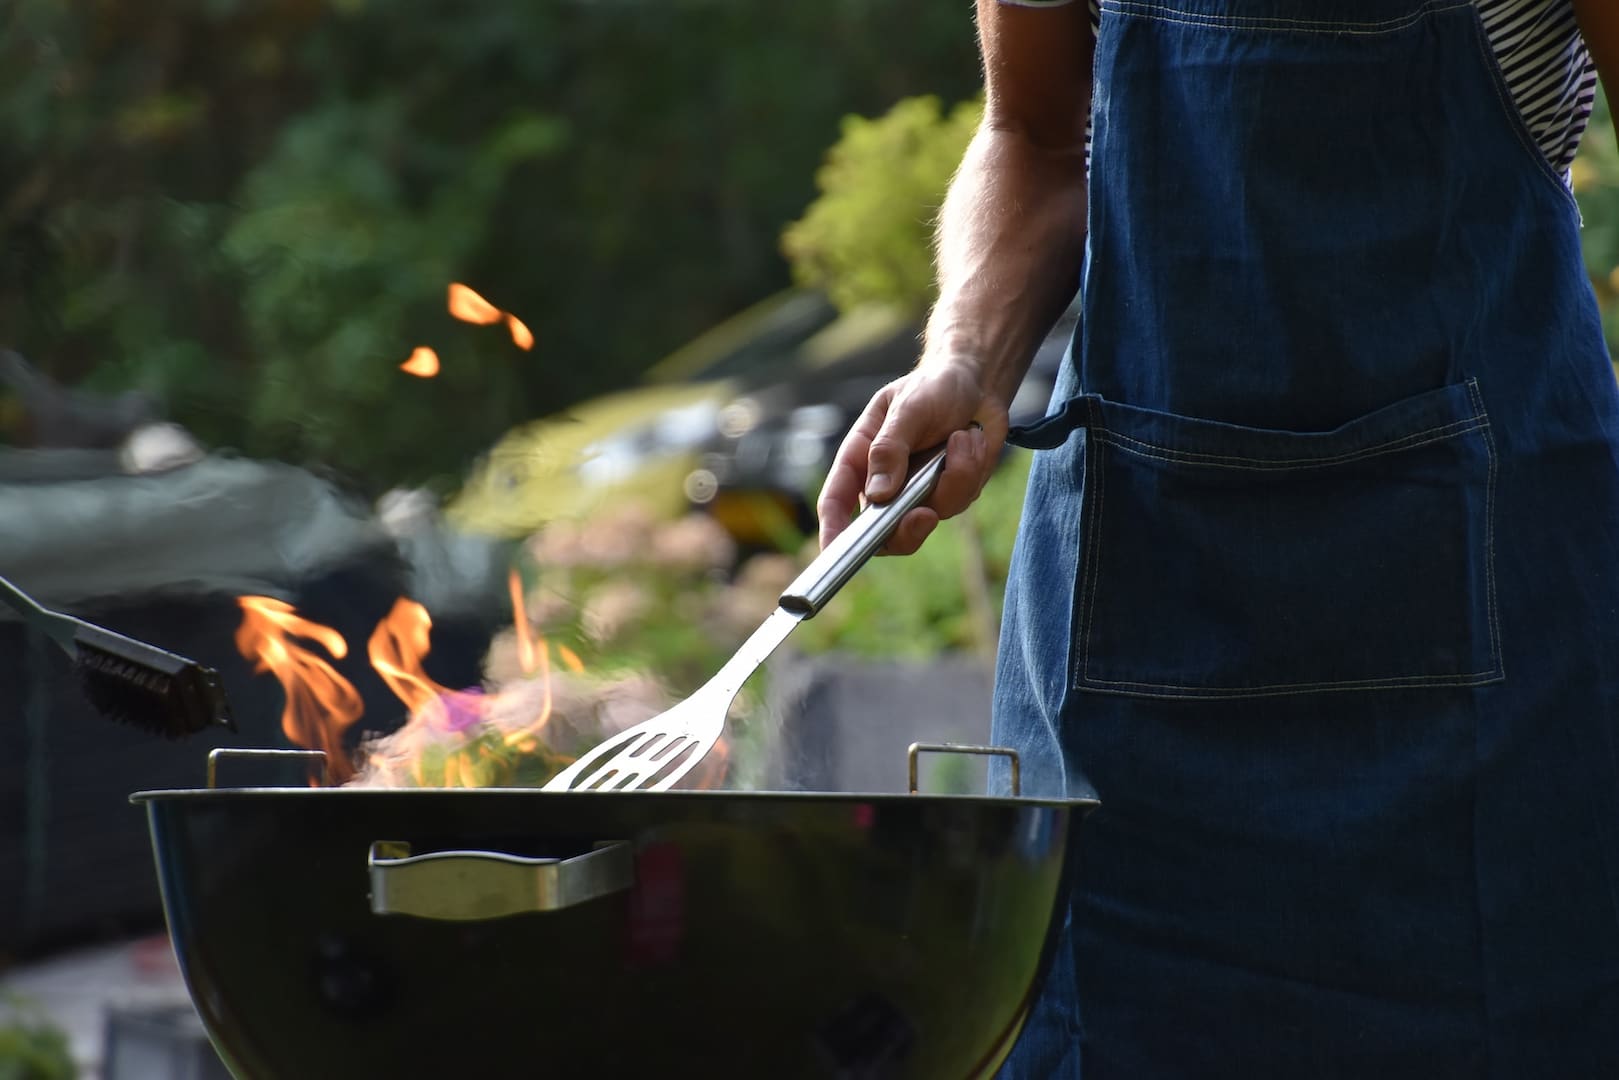 Man in apron grilling on barbecue